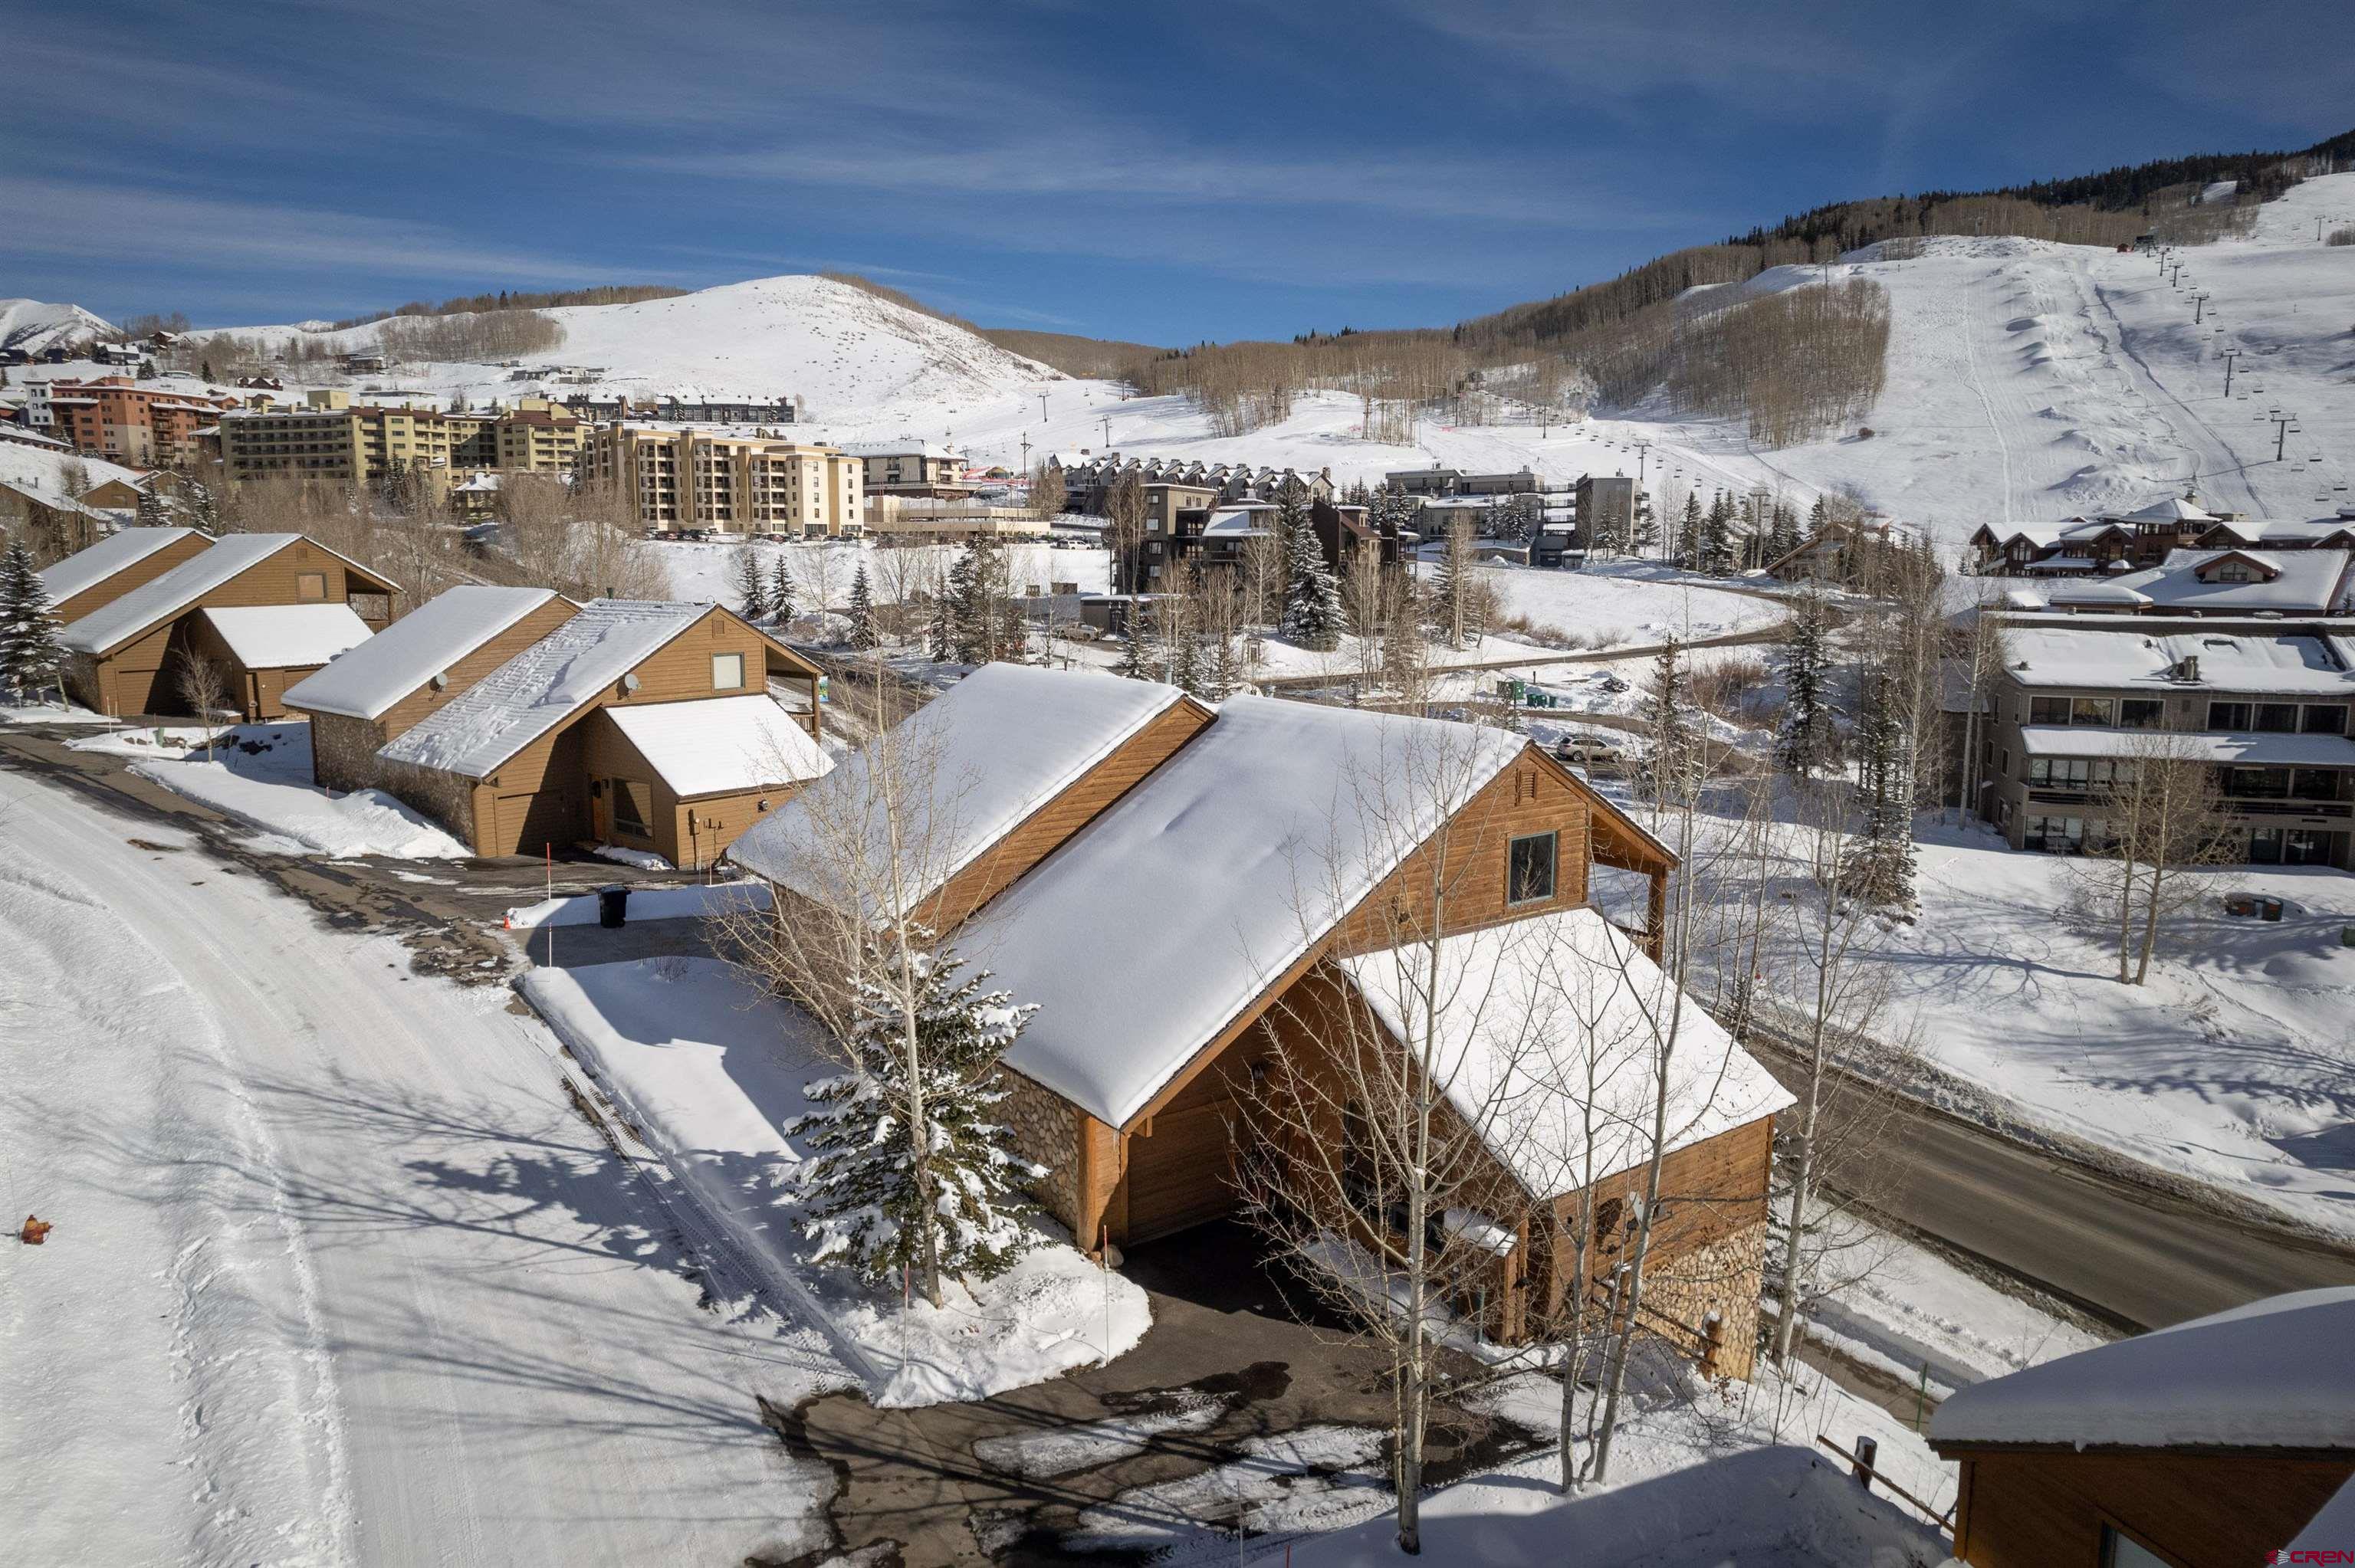 131 Snowmass Road, Mt. Crested Butte, CO 